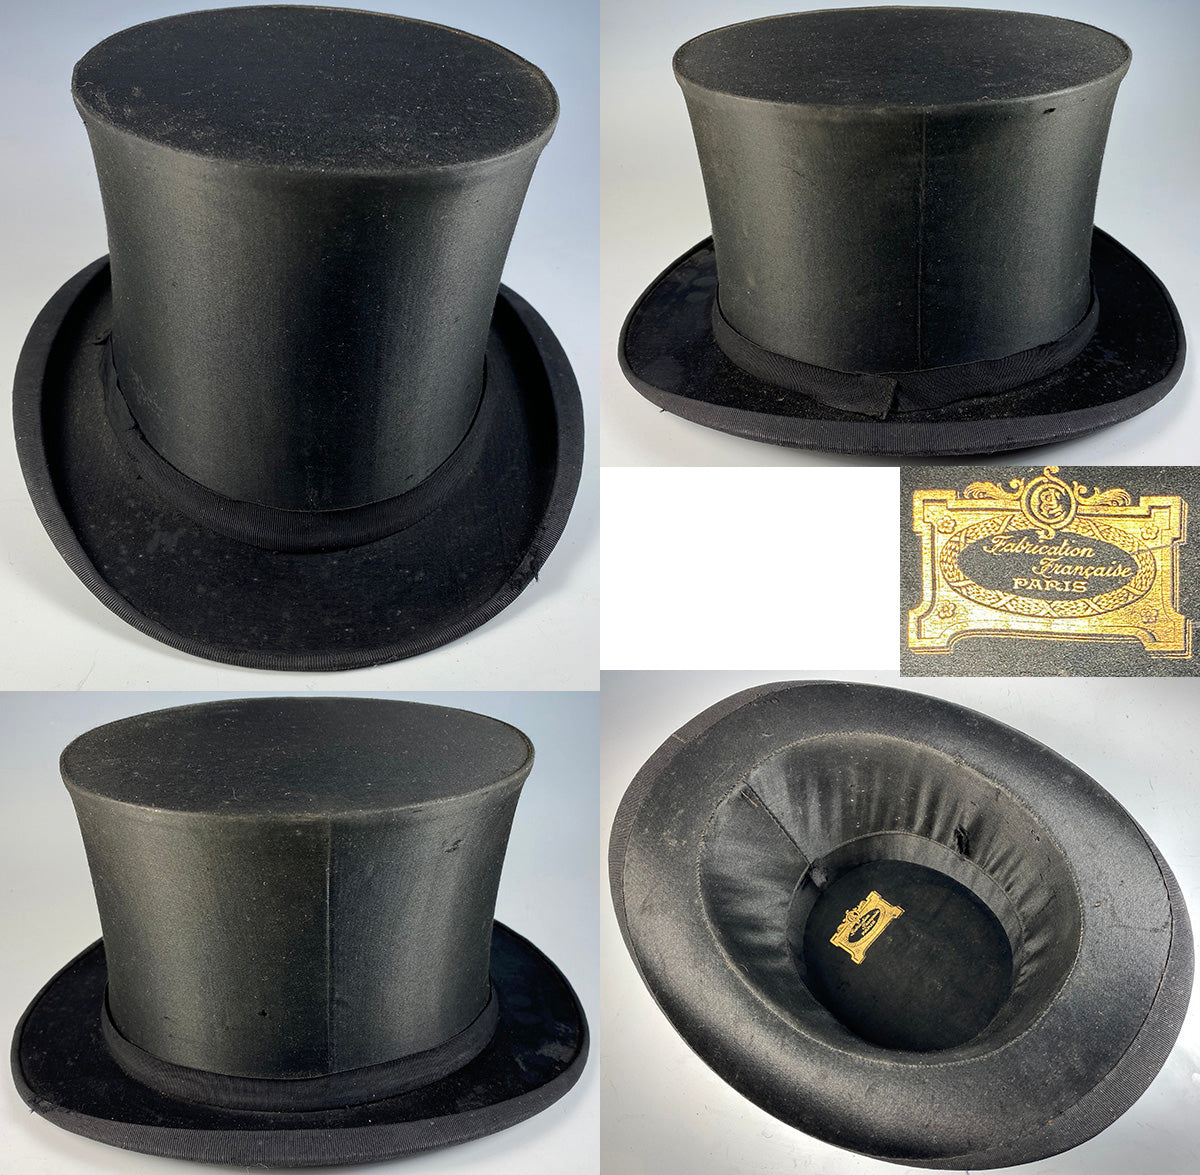 Mid-19th Century French Oval Pigskin Leather Hat Box With Original Top Hat